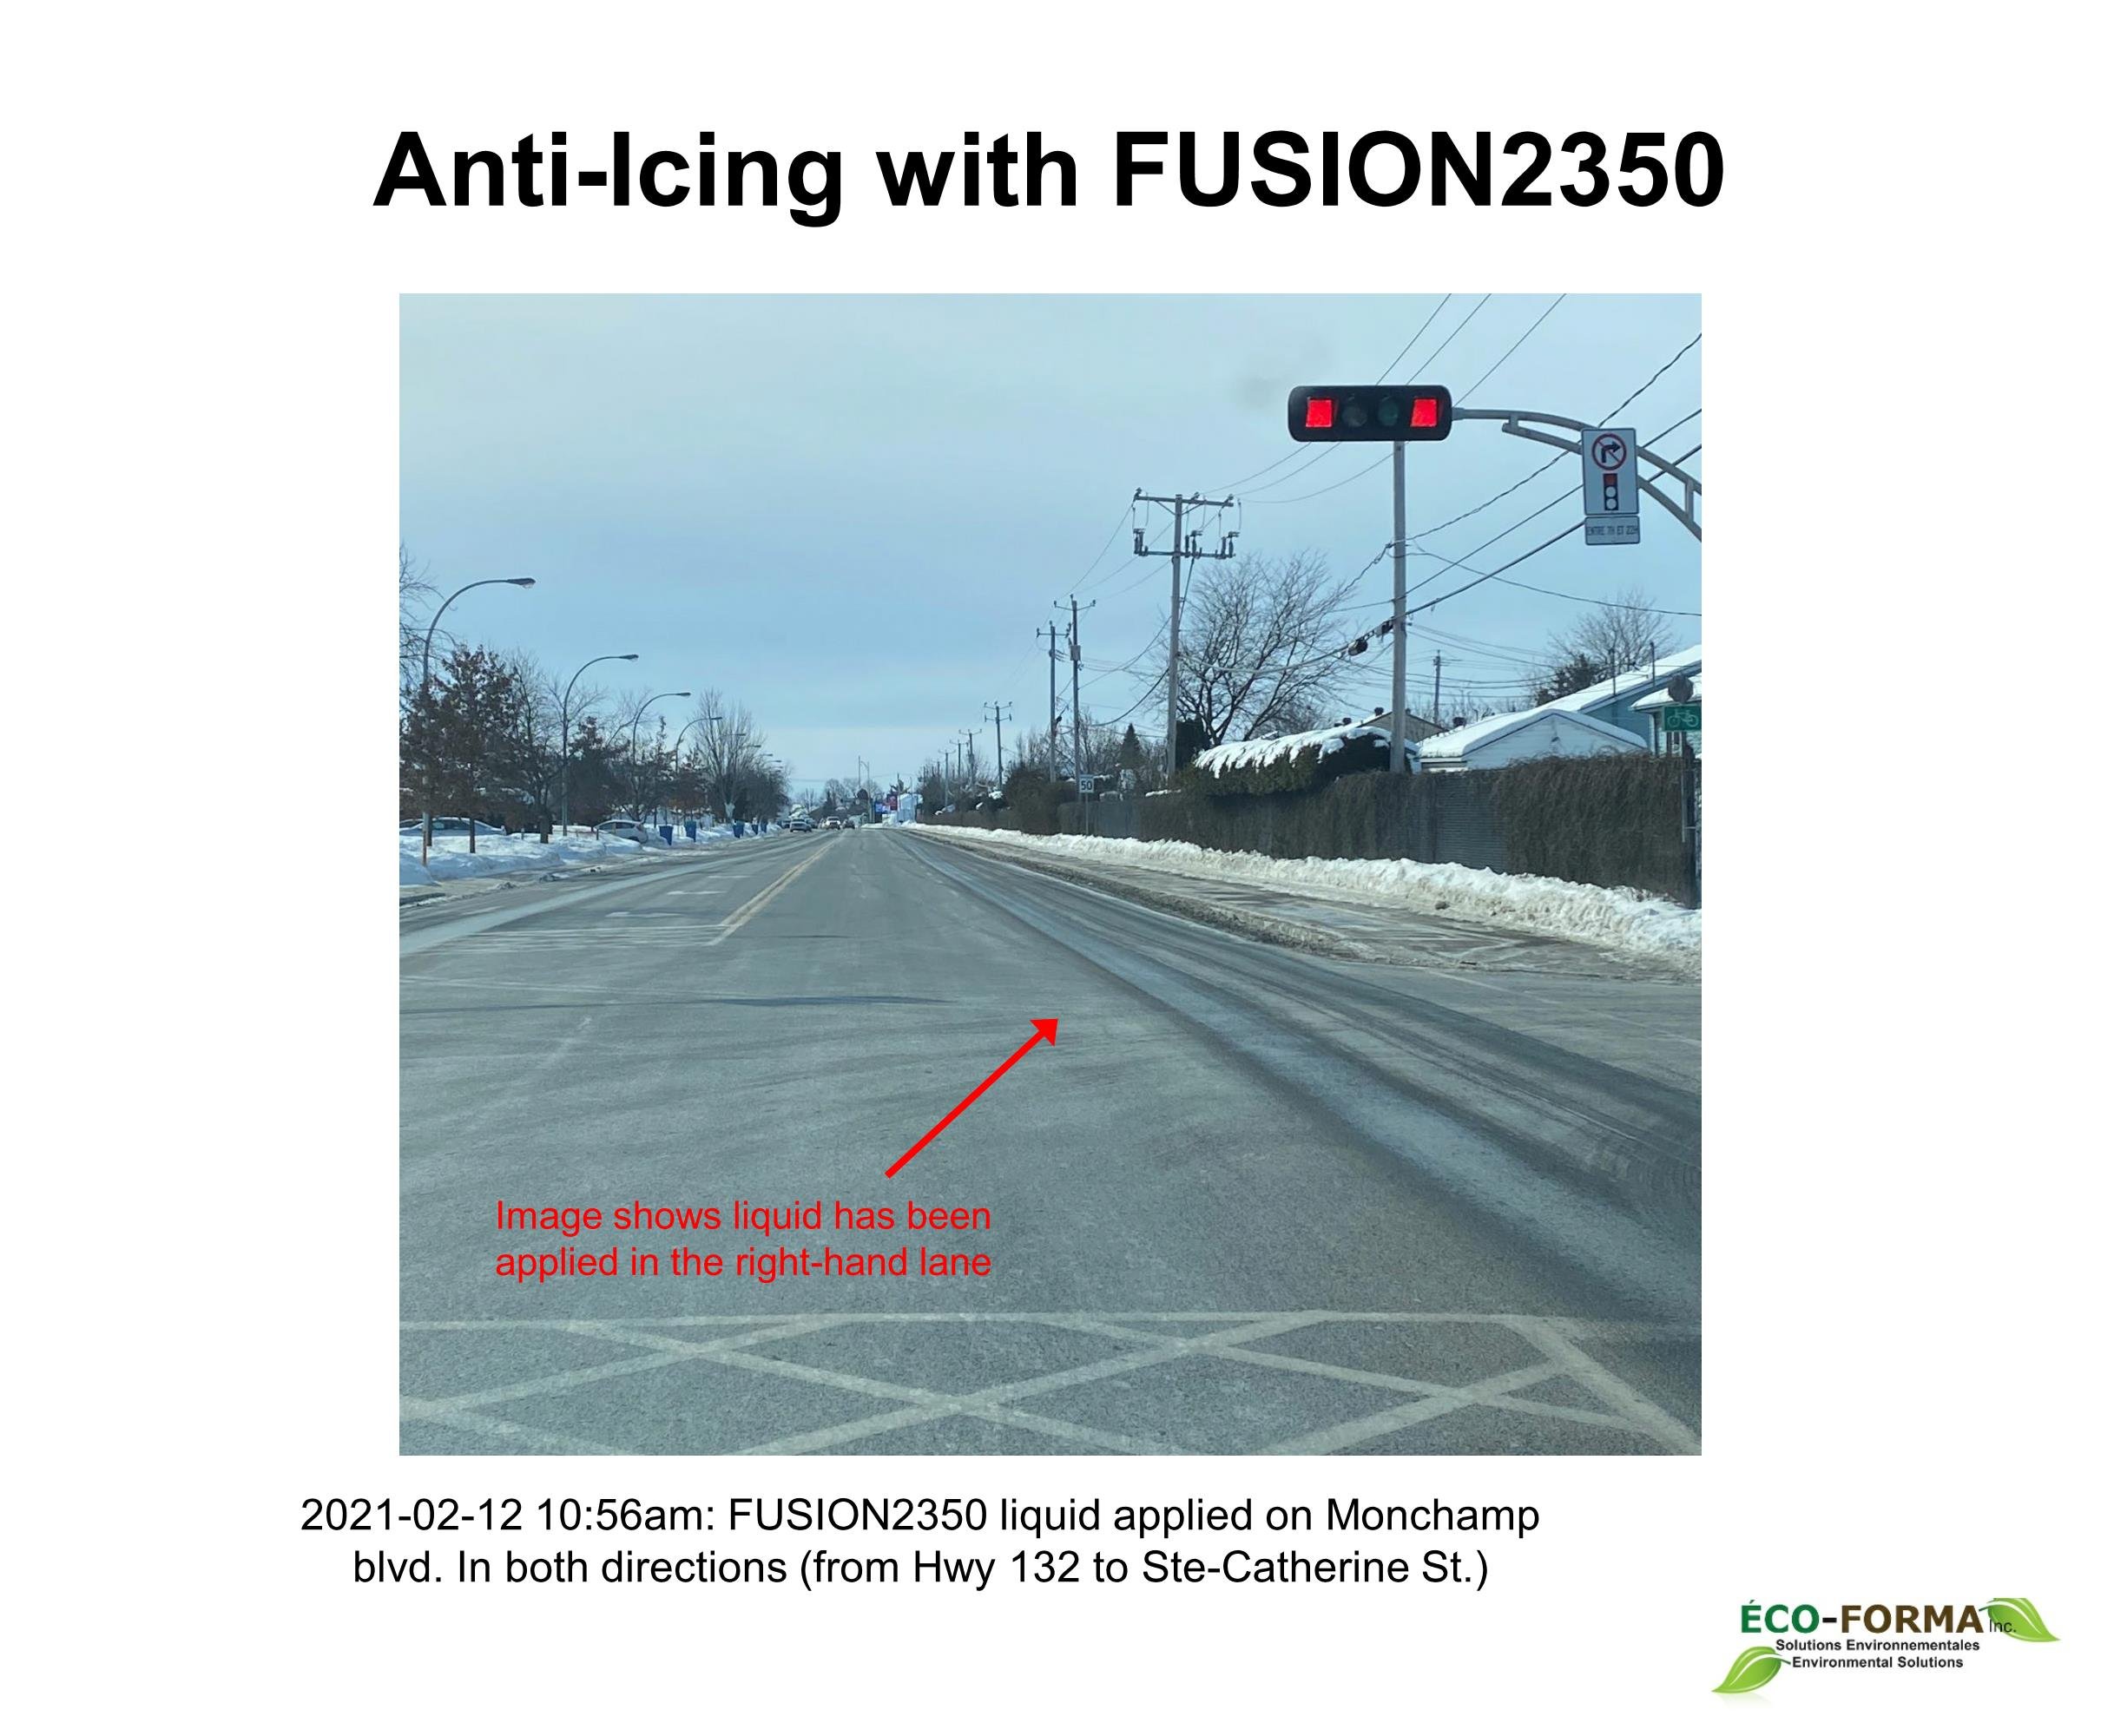 Eco-Forma_Anti-Icing with FUSION2350_St-Constant - 2021 02 14_ENGLISH_Page_2.jpeg